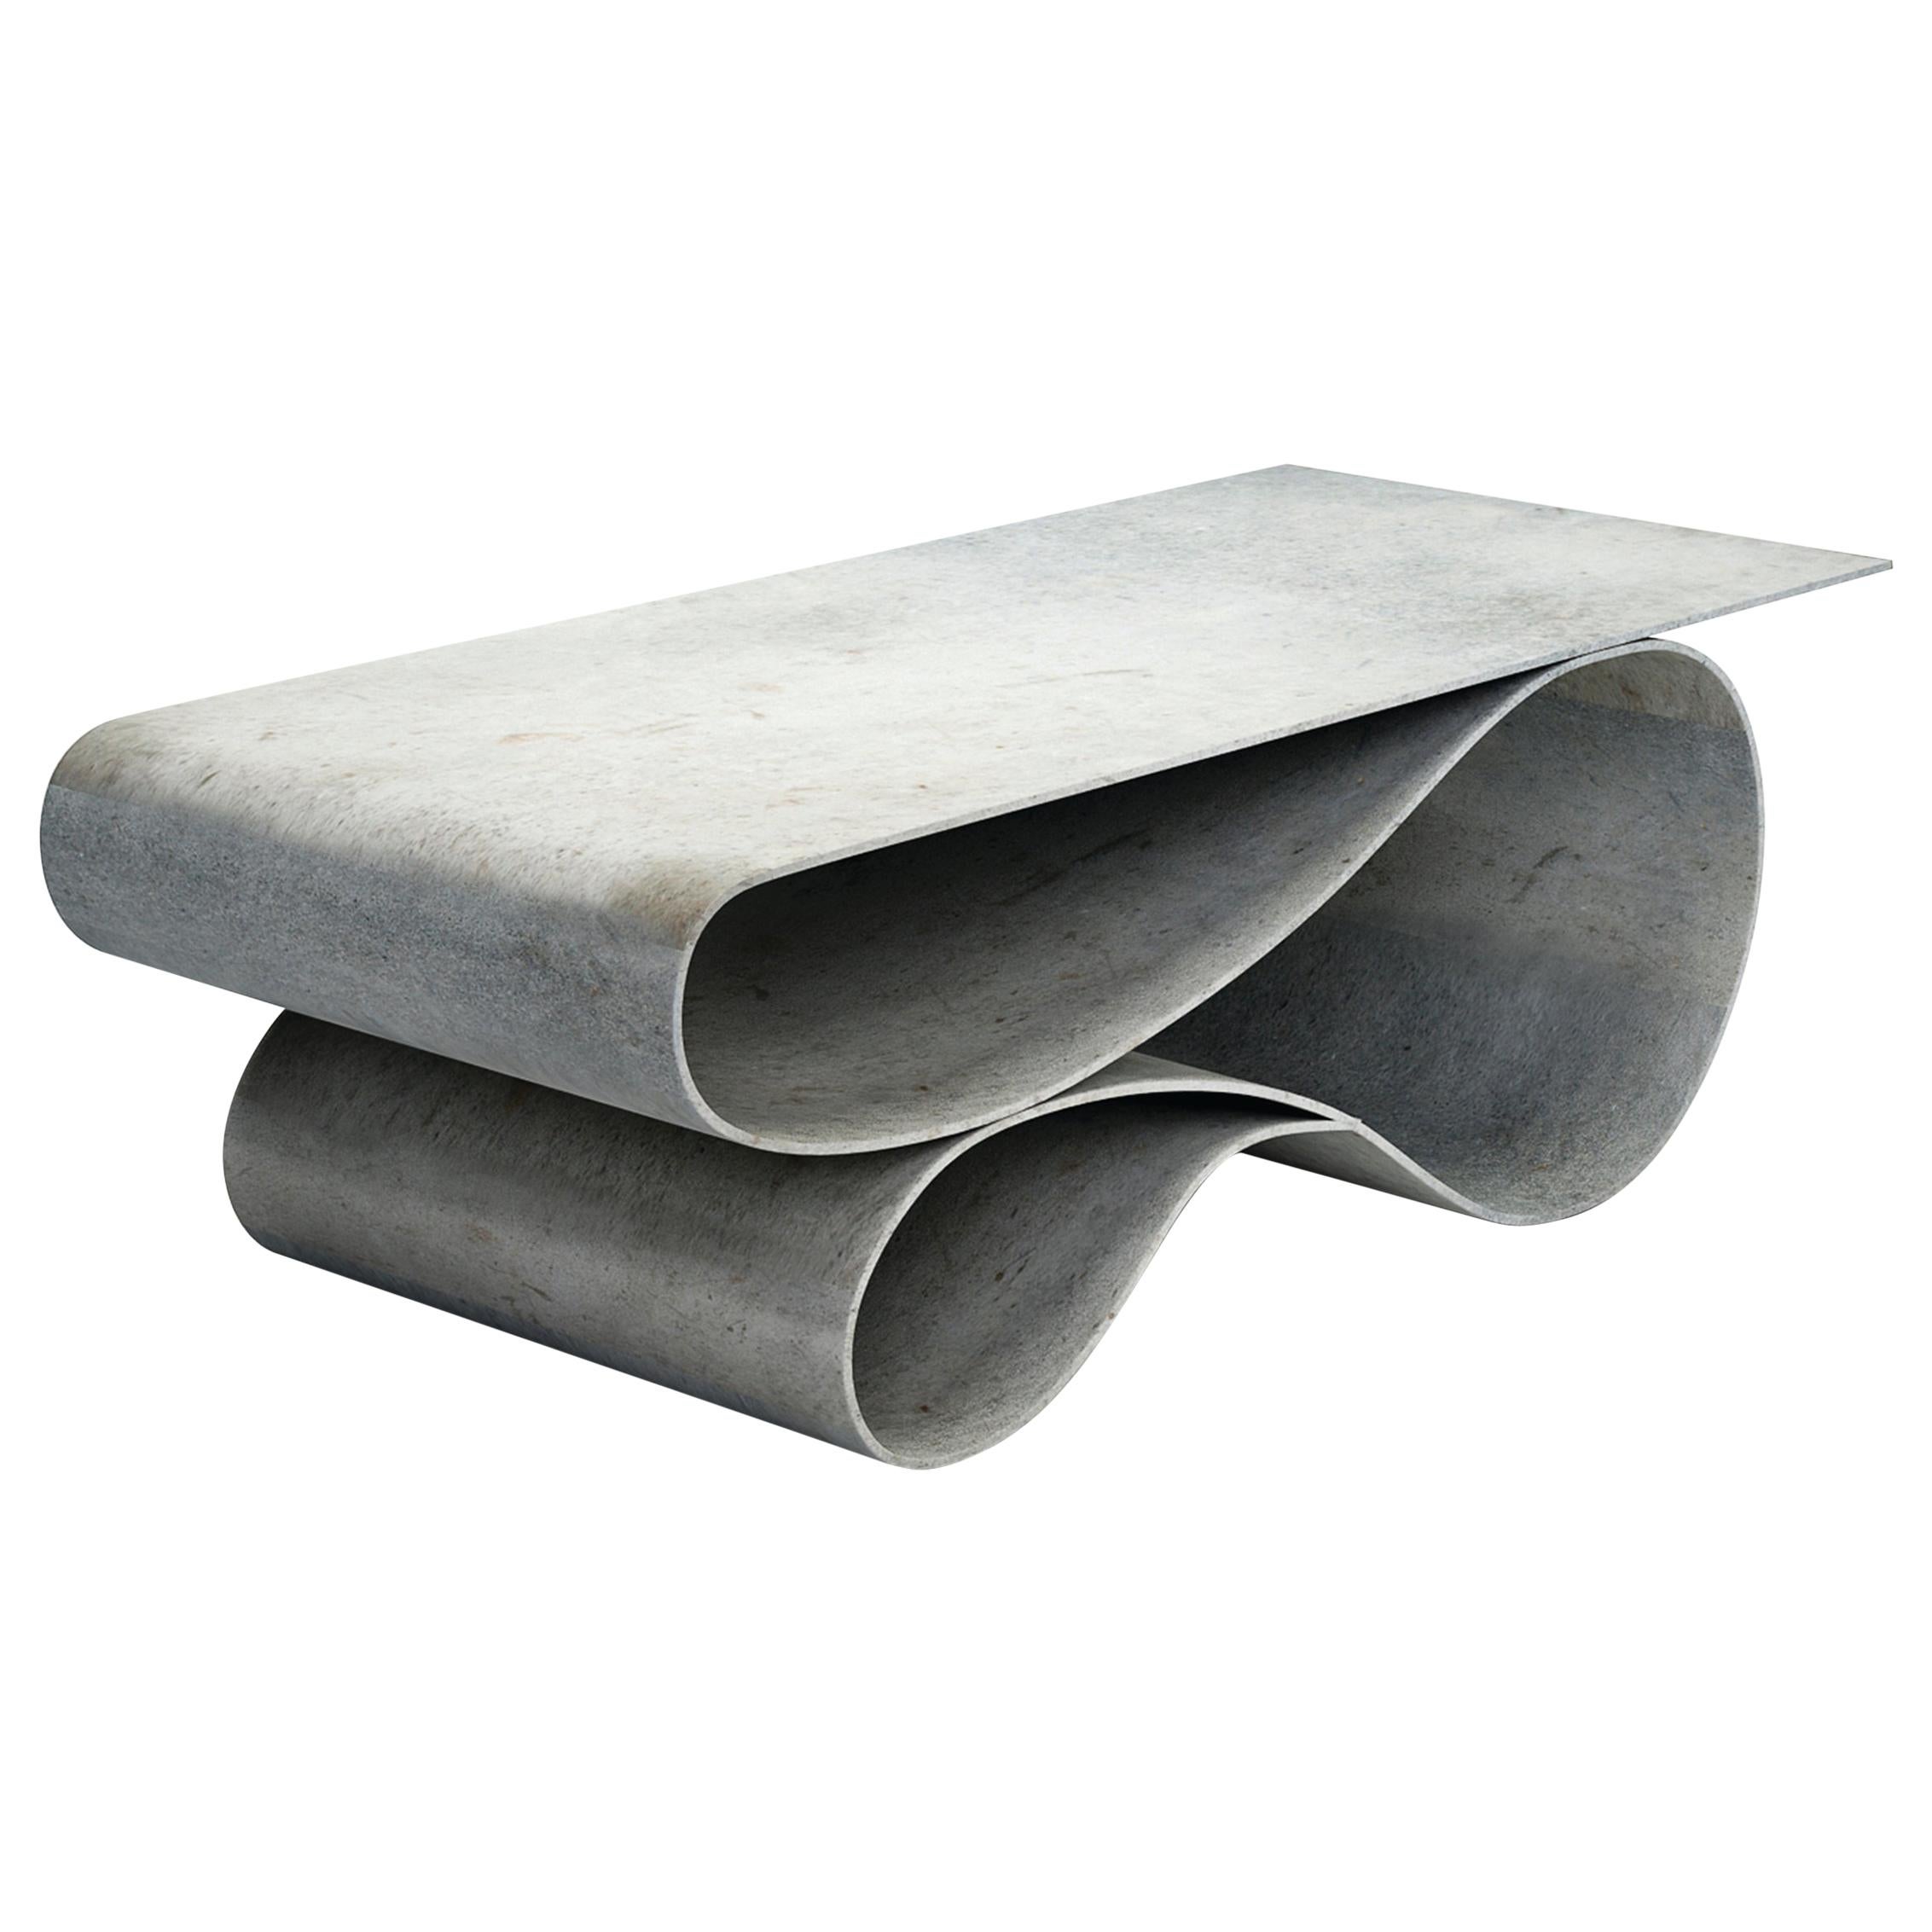 Whorl Coffee Table, From the Concrete Canvas Collection, by Neal Aronowitz